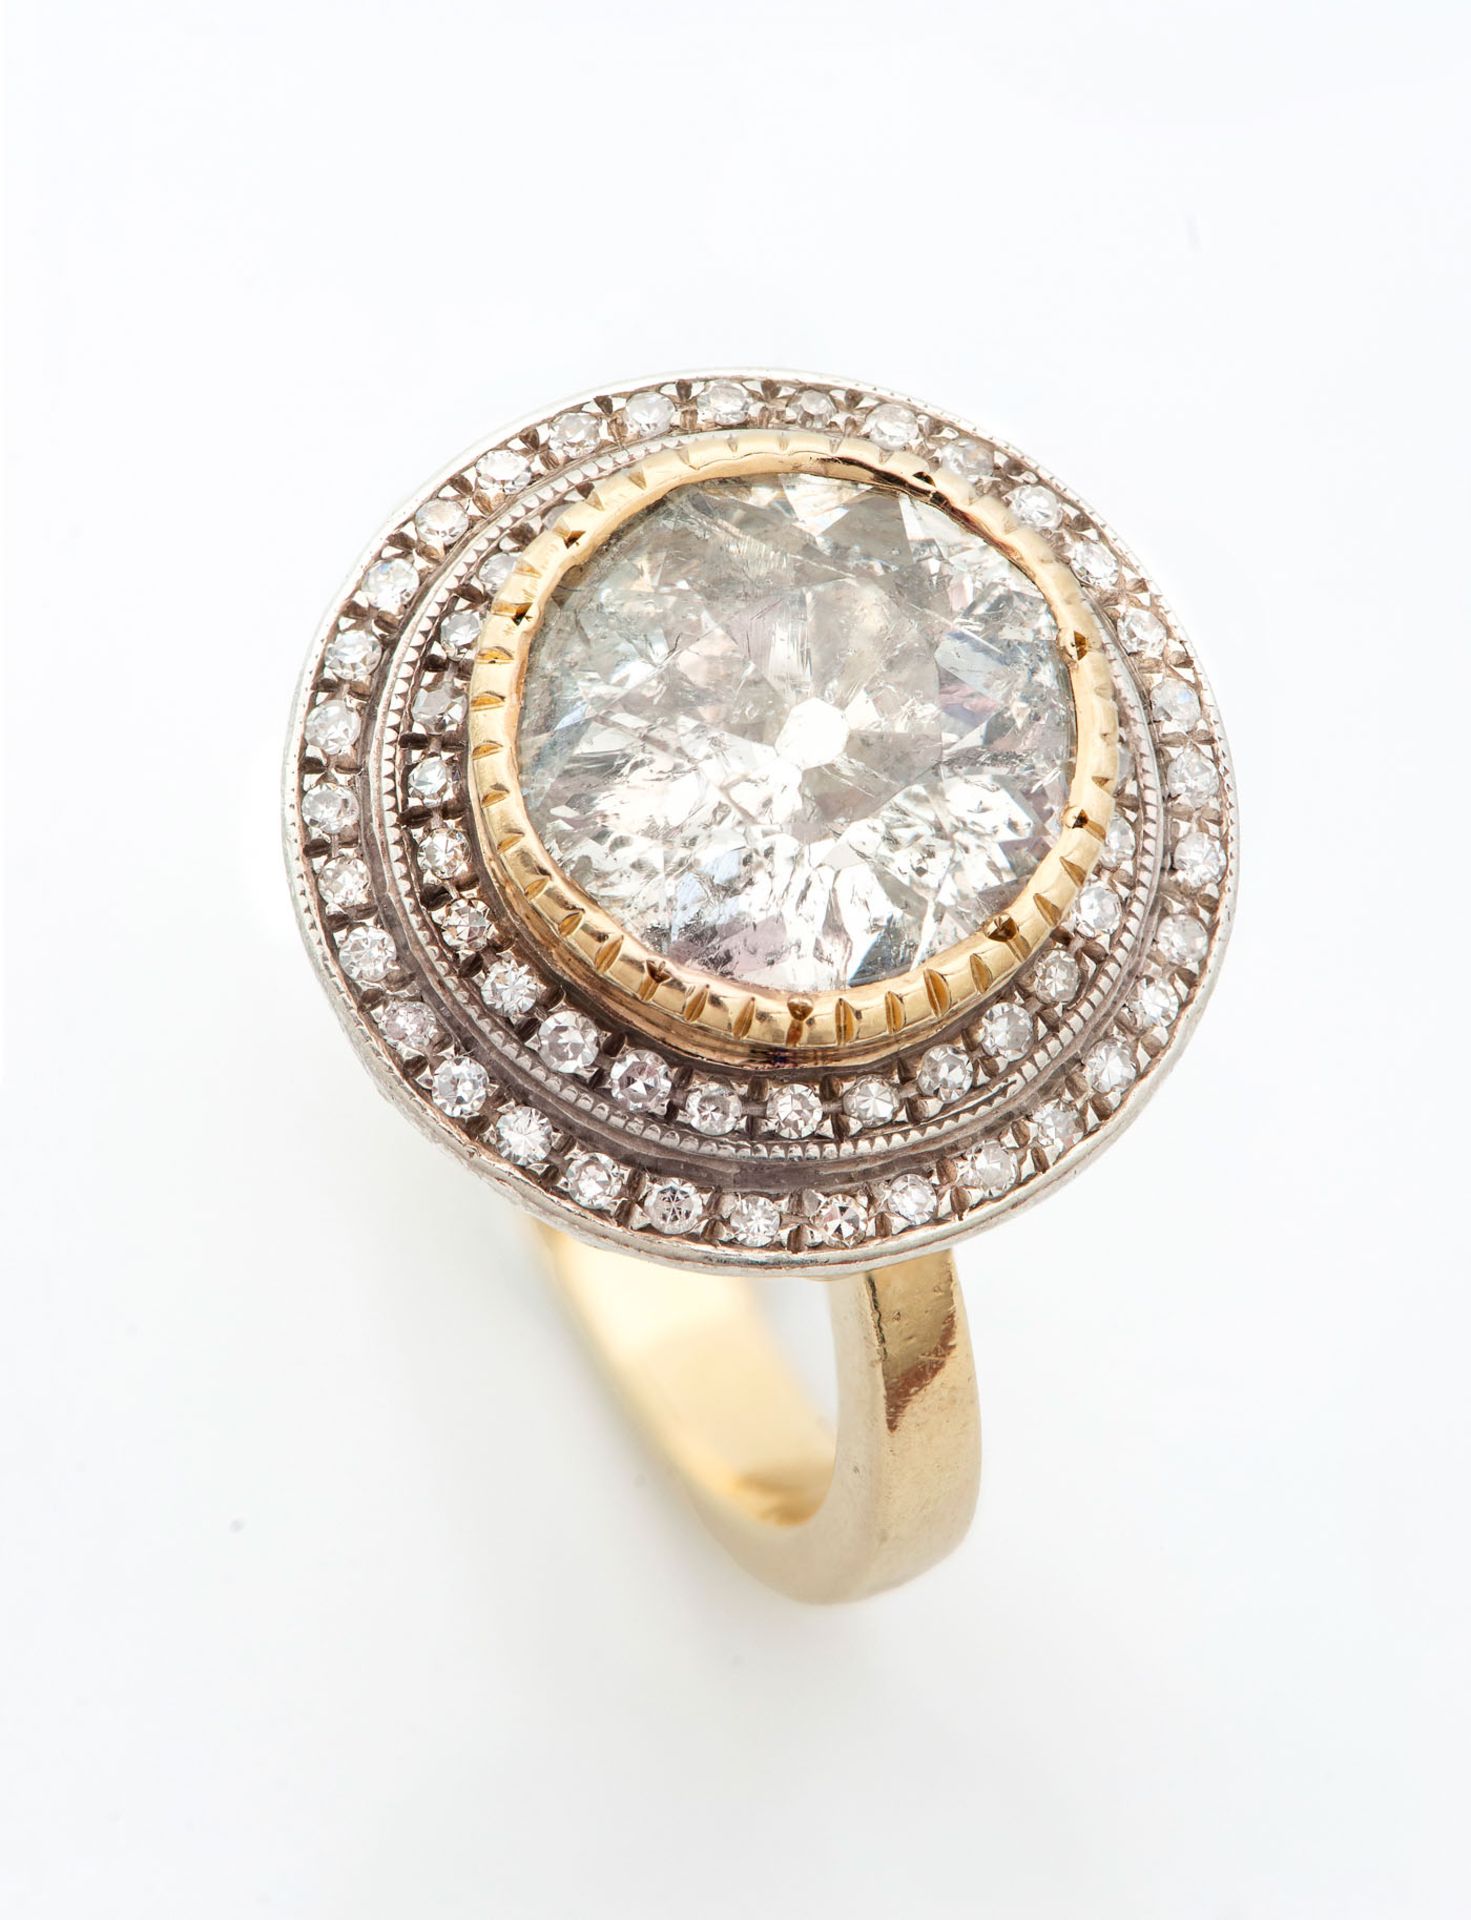 An 18K Two Tone Gold and Diamond Ring